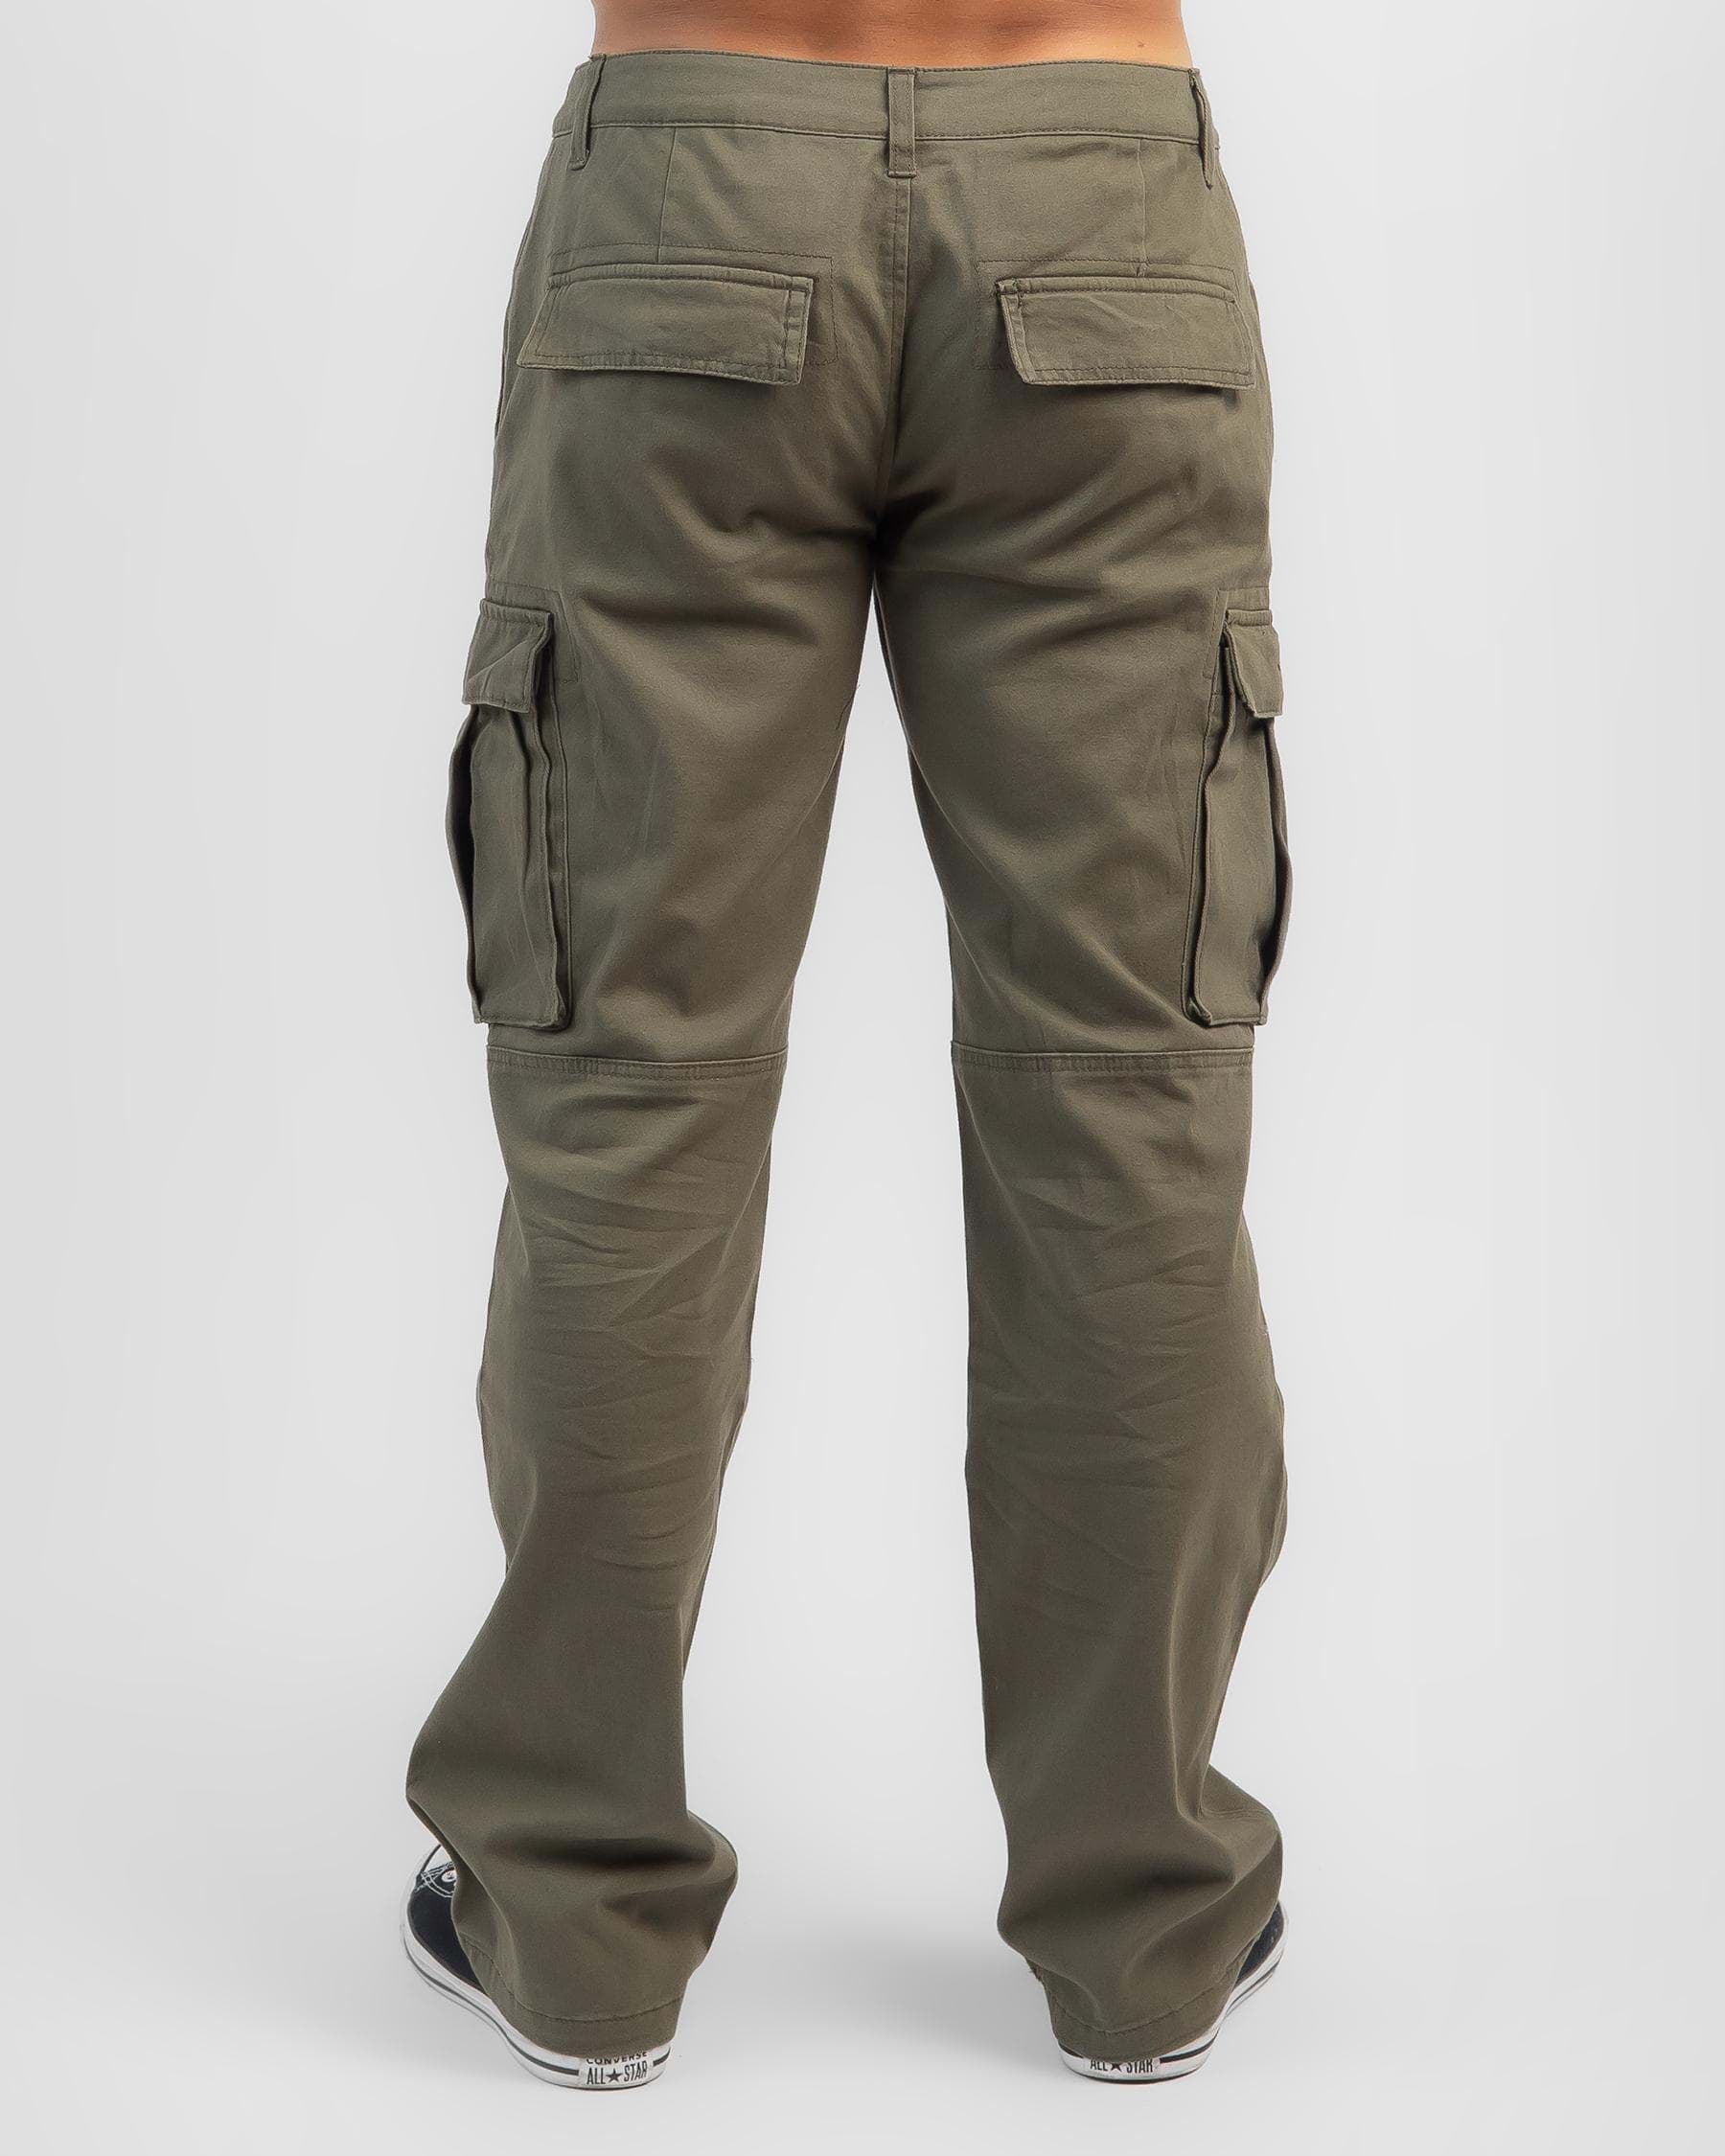 Jacks Urban Pants In Washed Green - Fast Shipping & Easy Returns - City ...